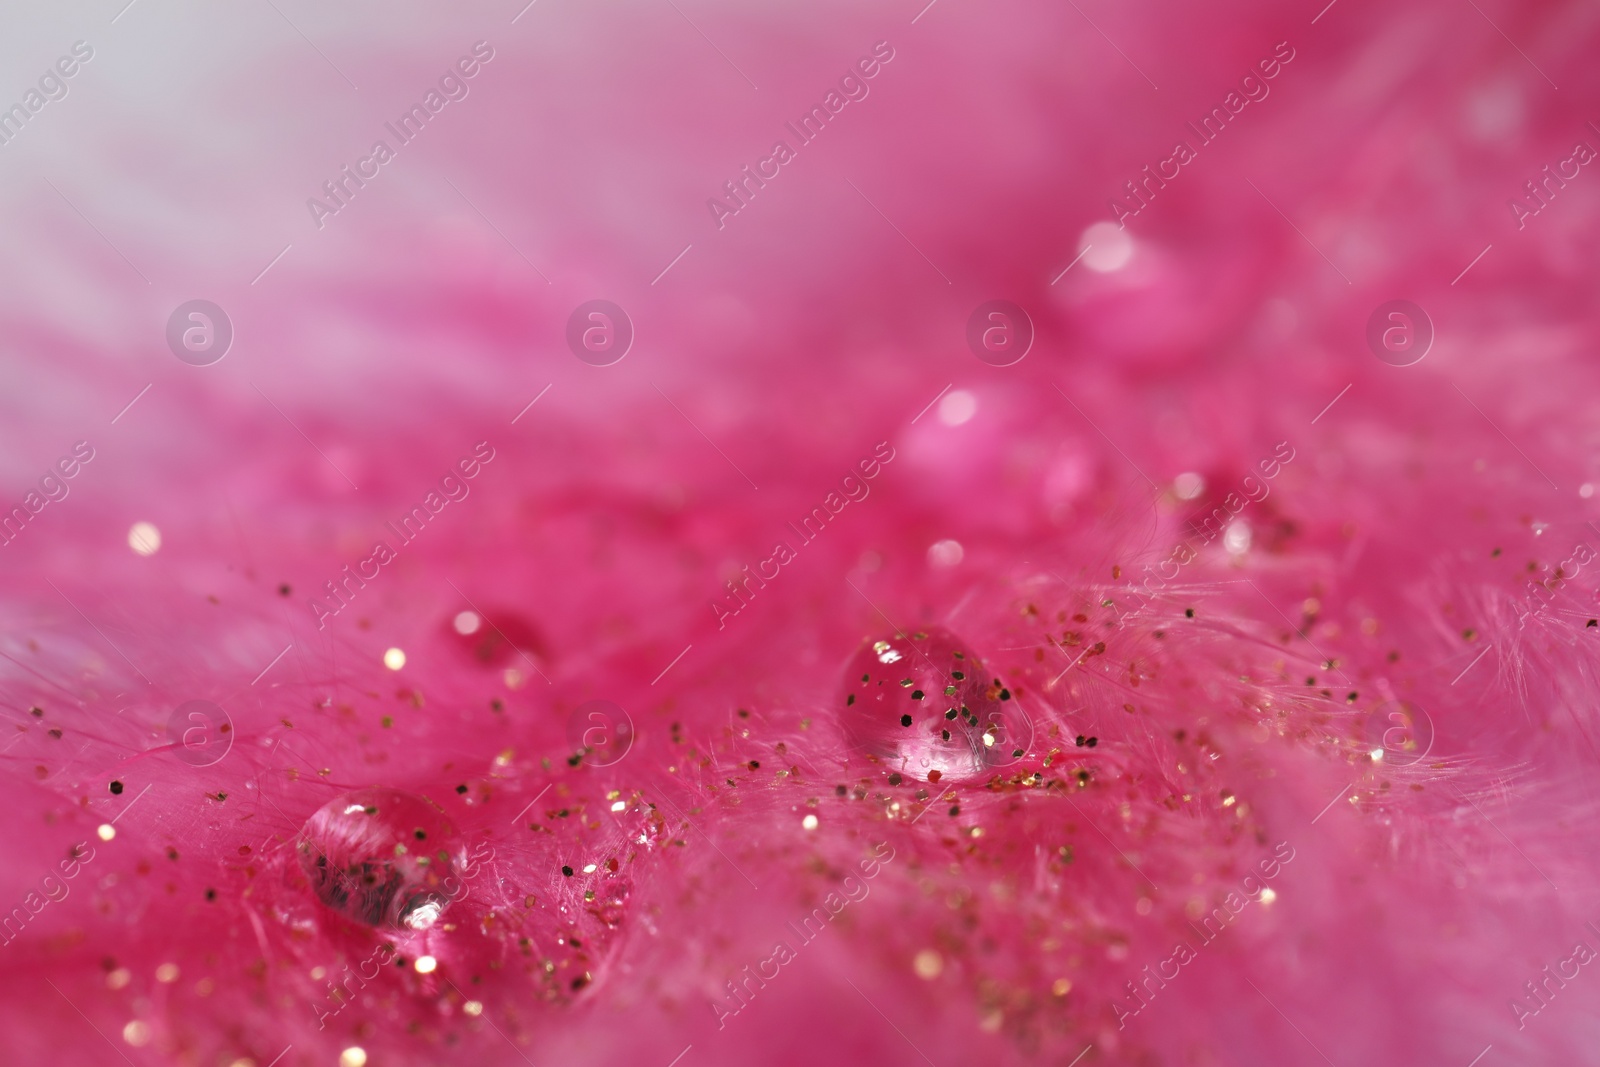 Photo of Closeup view of beautiful feather with dew drops and glitter